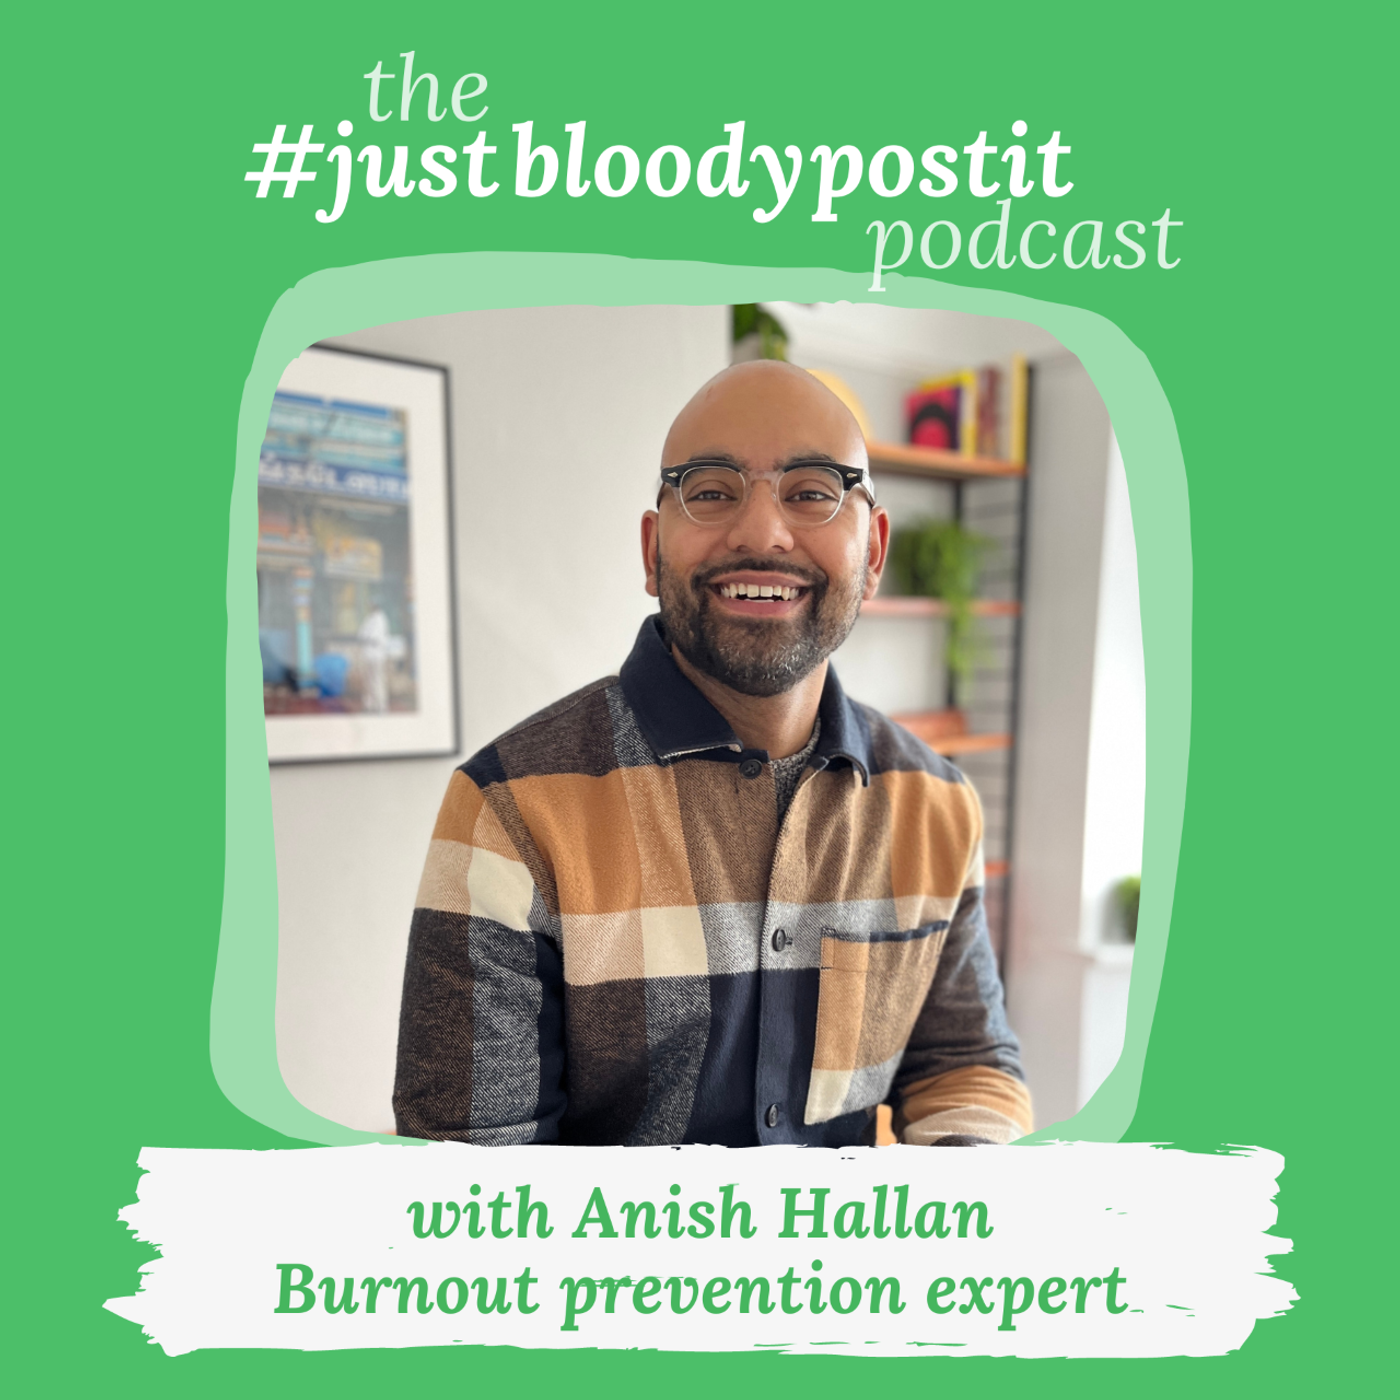 S6 Ep116: Ep #116: finding peace in your work with burnout prevention expert Anish Hallan